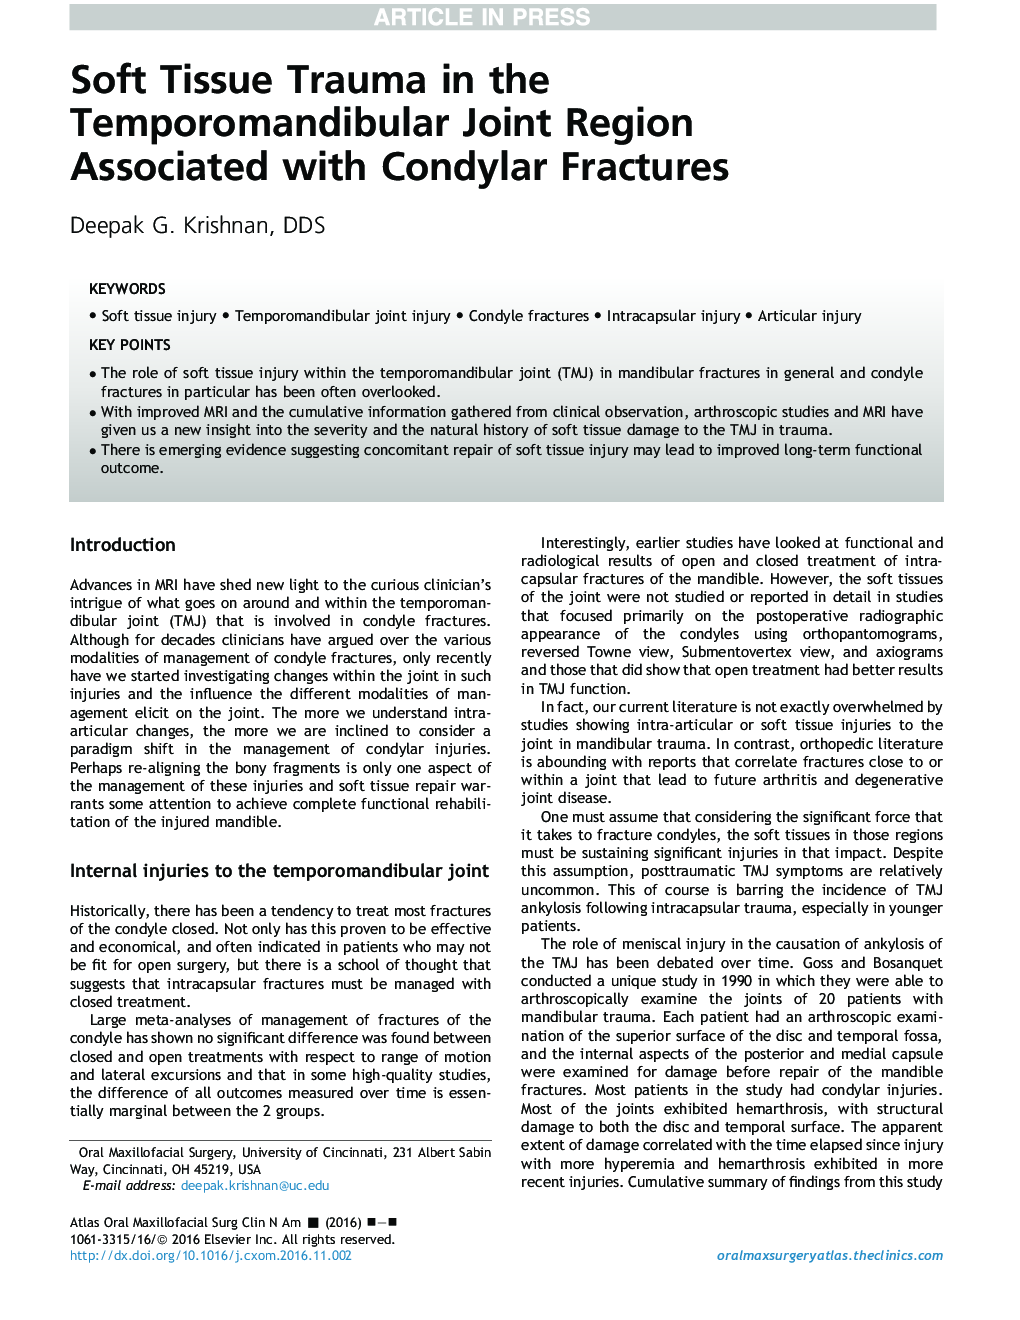 Soft Tissue Trauma in the Temporomandibular Joint Region Associated with Condylar Fractures